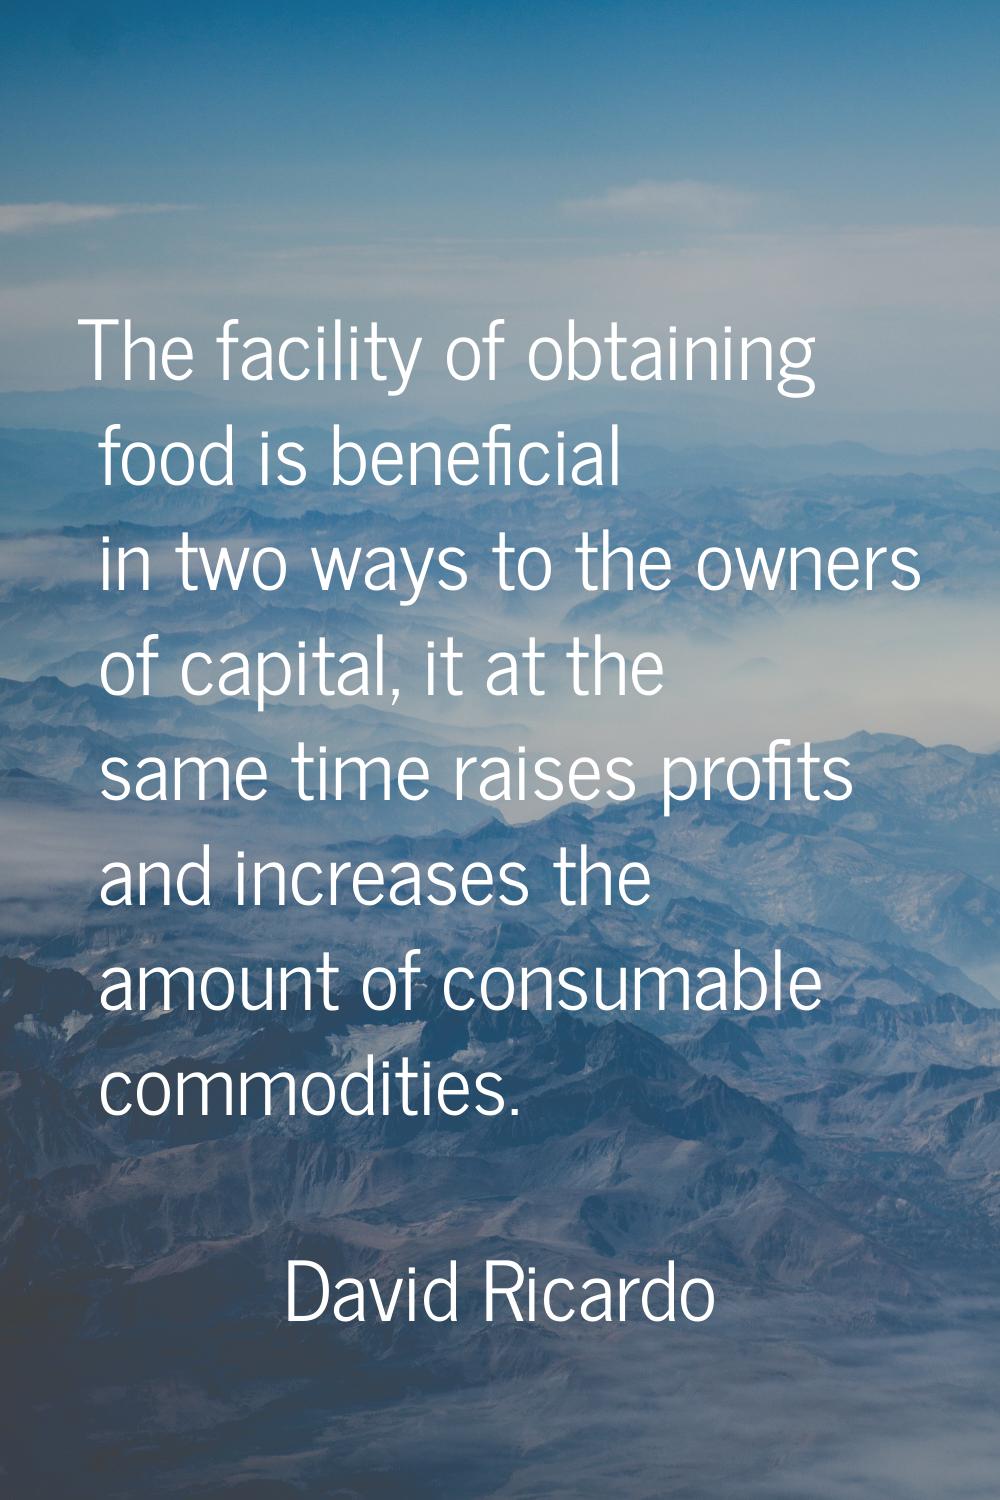 The facility of obtaining food is beneficial in two ways to the owners of capital, it at the same t